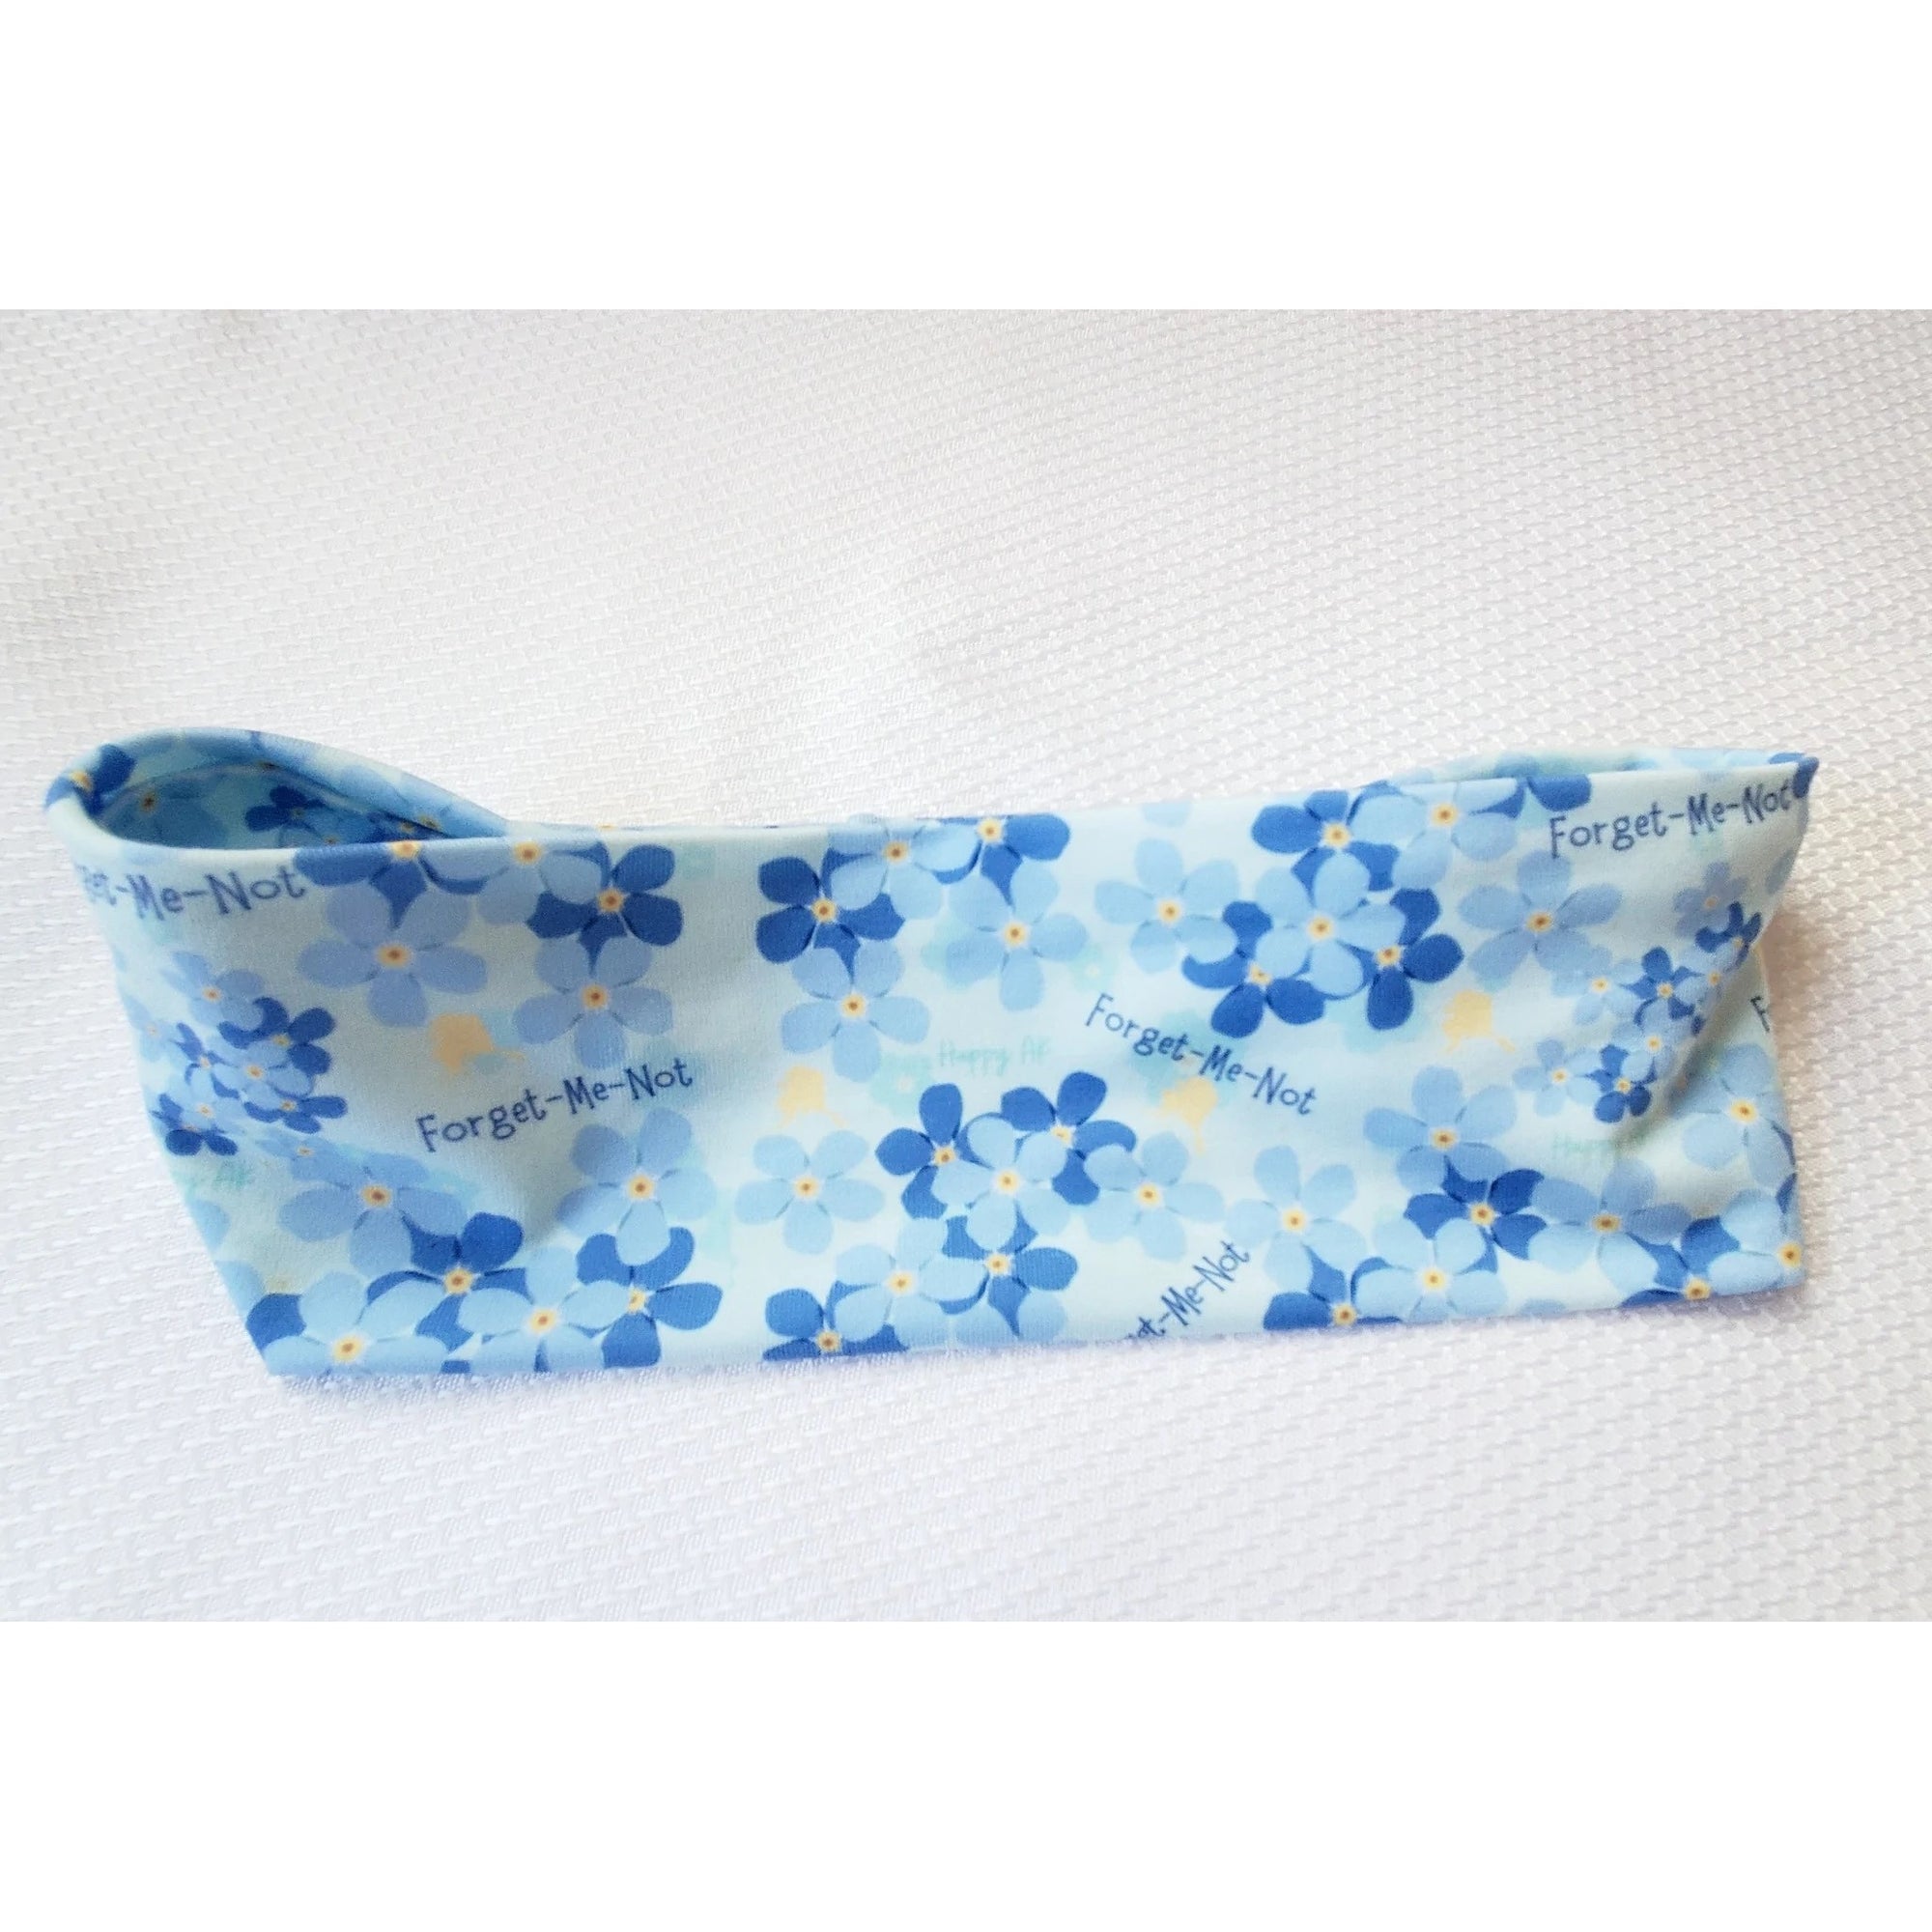 Forget-Me-Not Headband